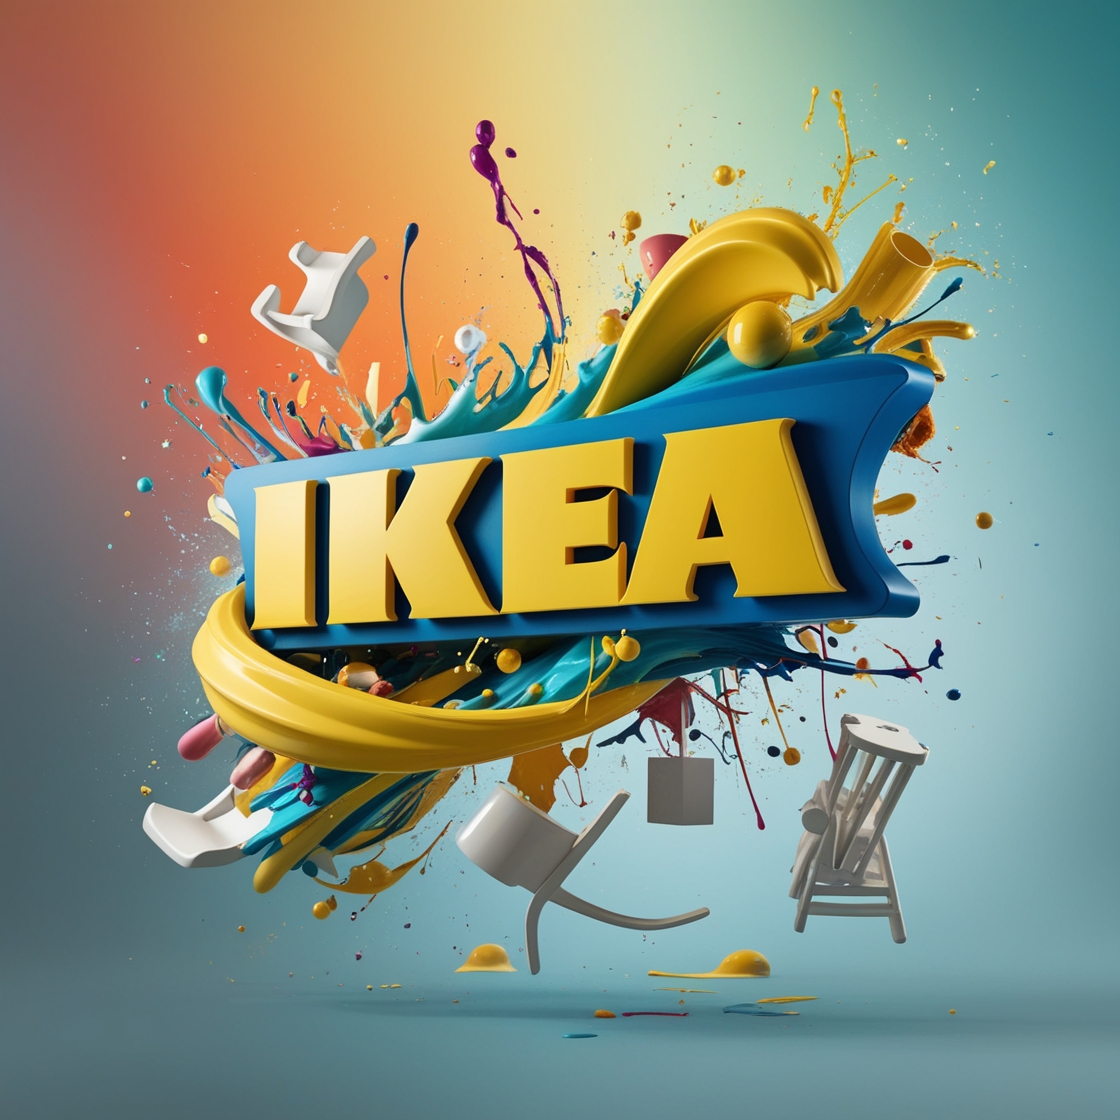 Default_Vibrant_yellow_and_white_extruded_logo_of_IKEA_reminis_3.jpg